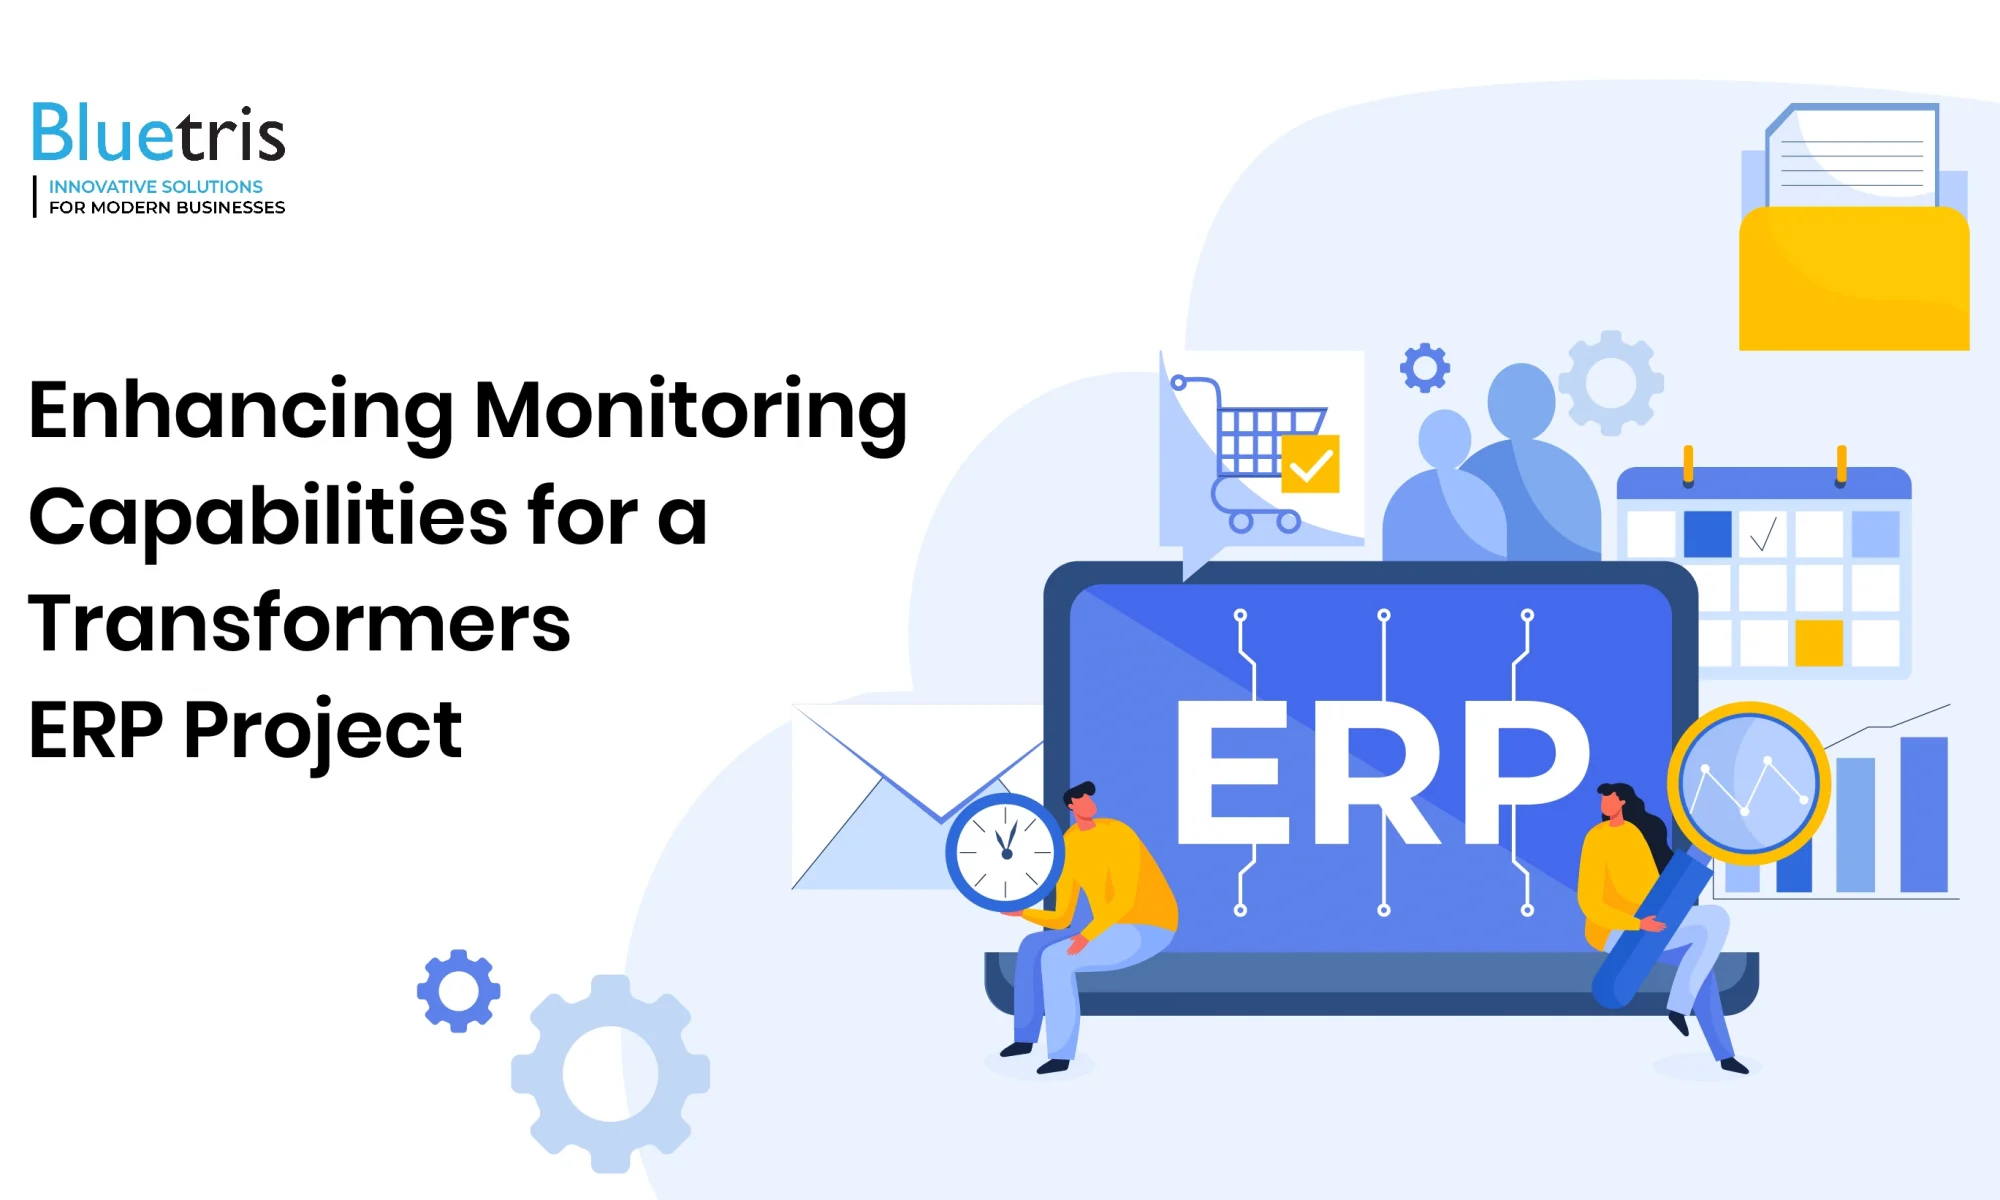 Enhancing Monitoring Capabilities for a Transformers ERP ProjectEnhancing Monitoring Capabilities for a Transformers ERP Project